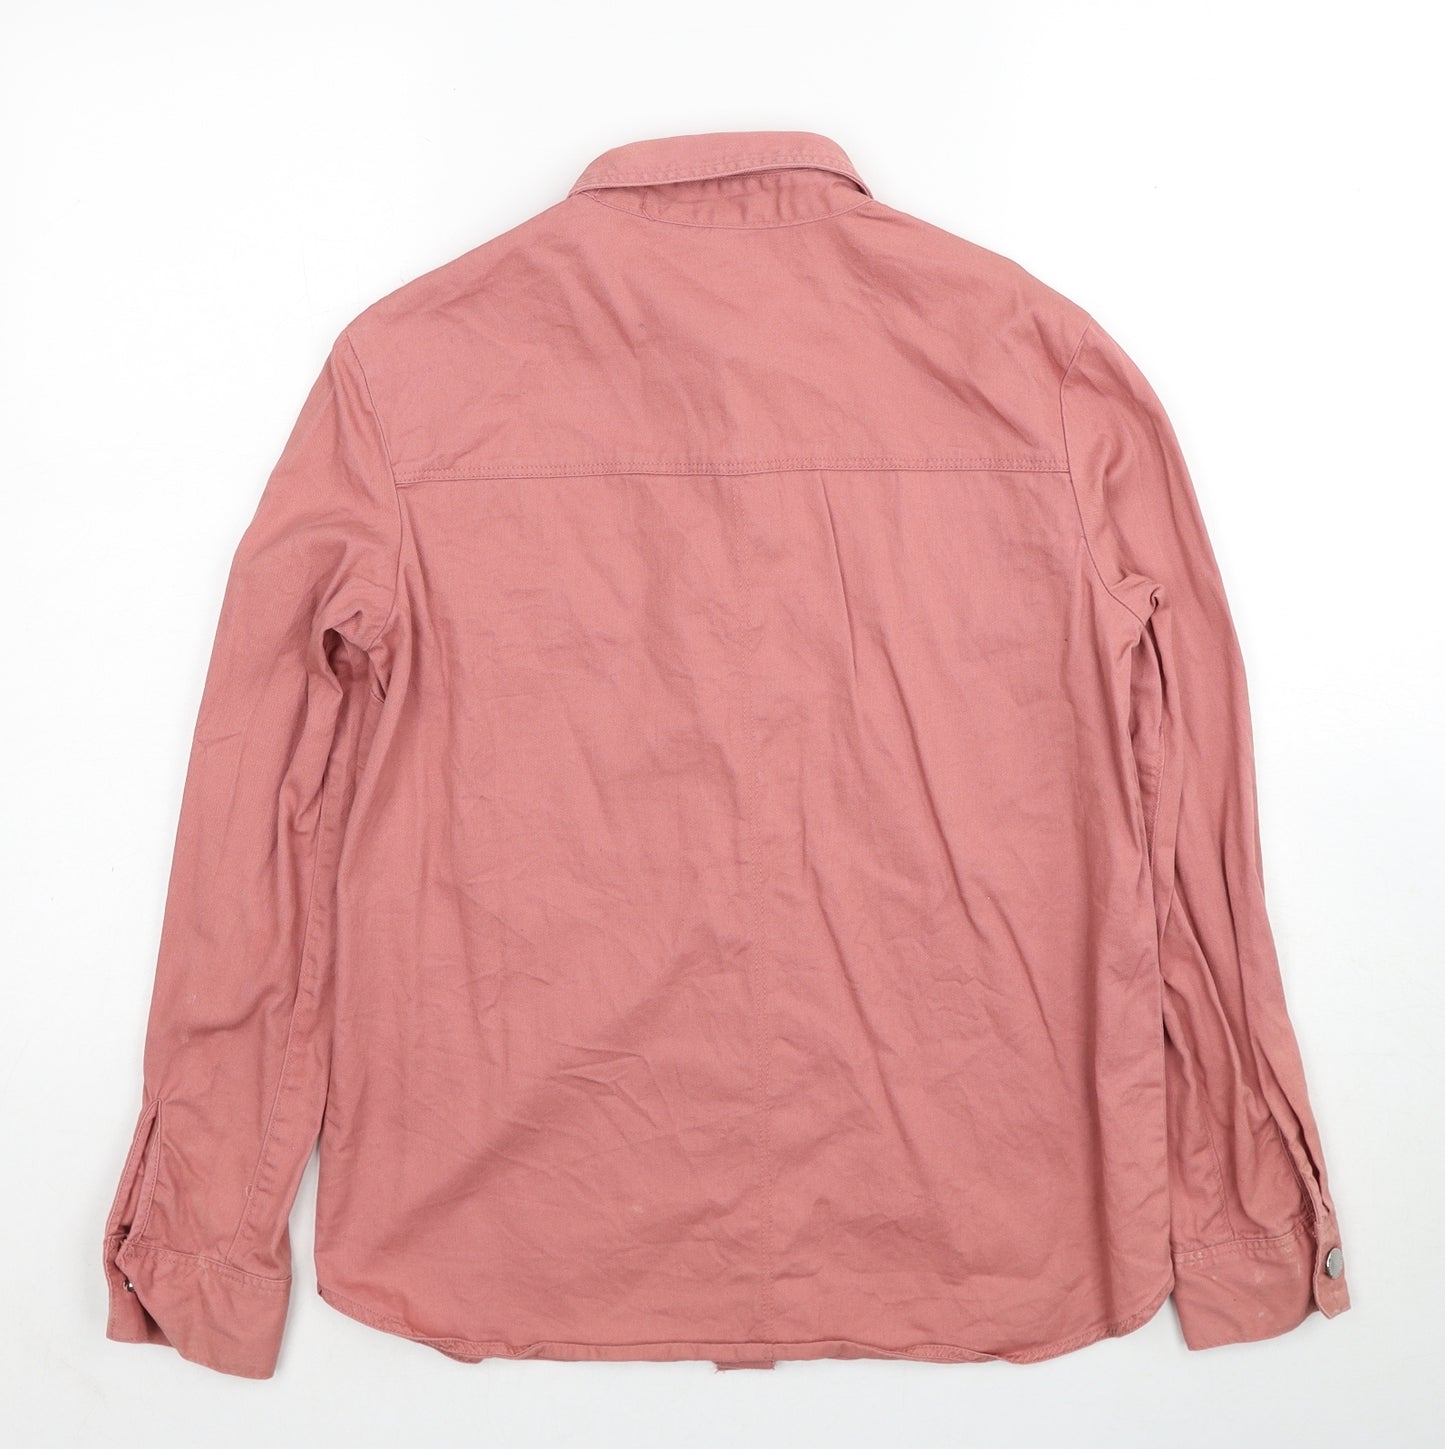 H&M Womens Pink Cotton Basic Blouse Size XS Collared